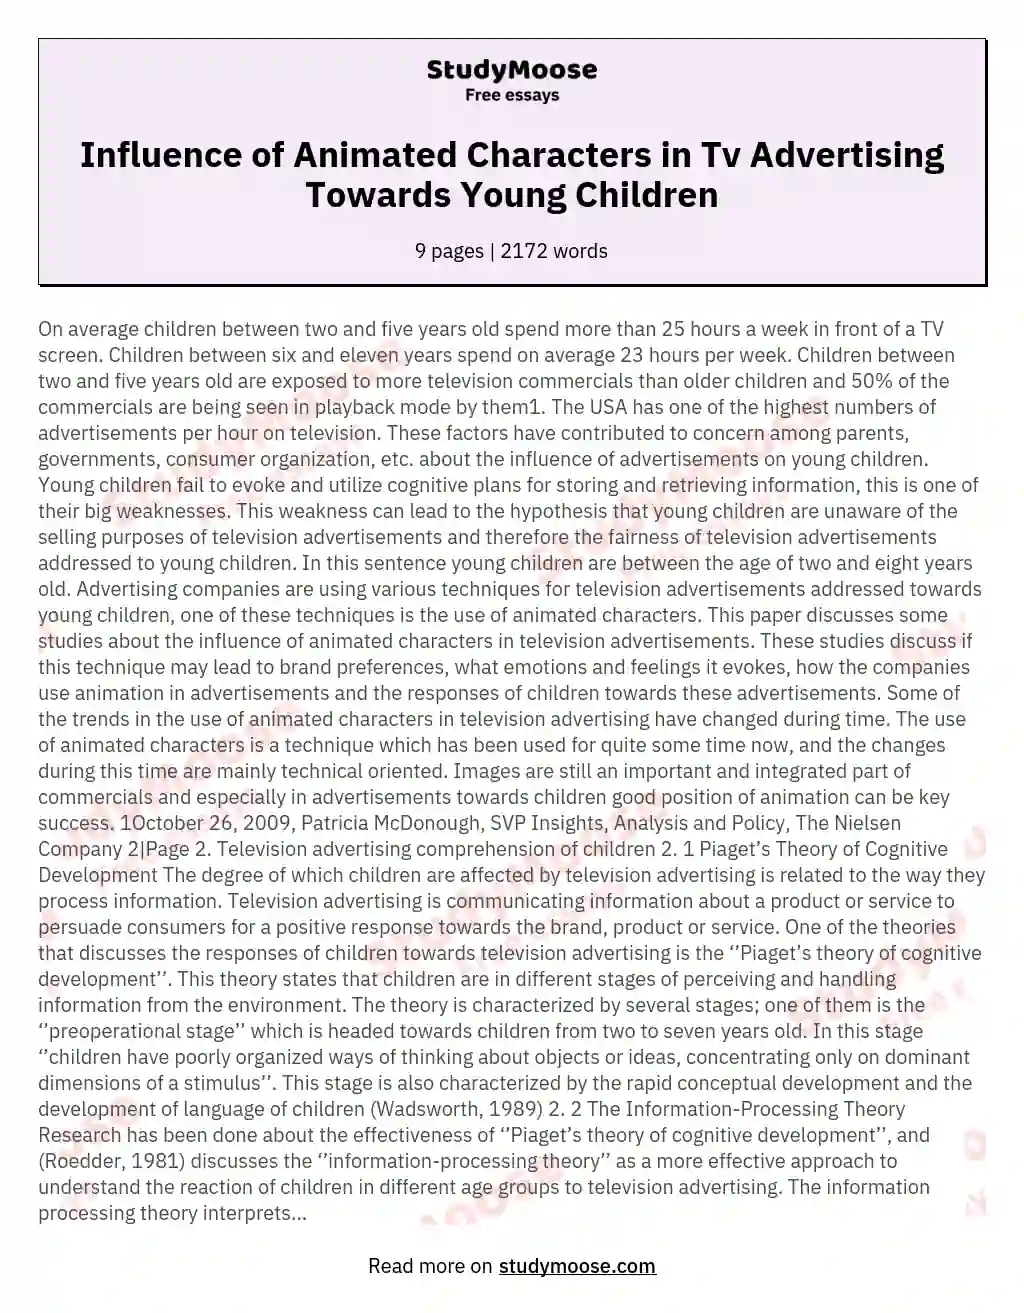 Influence of Animated Characters in Tv Advertising Towards Young Children  Free Essay Example